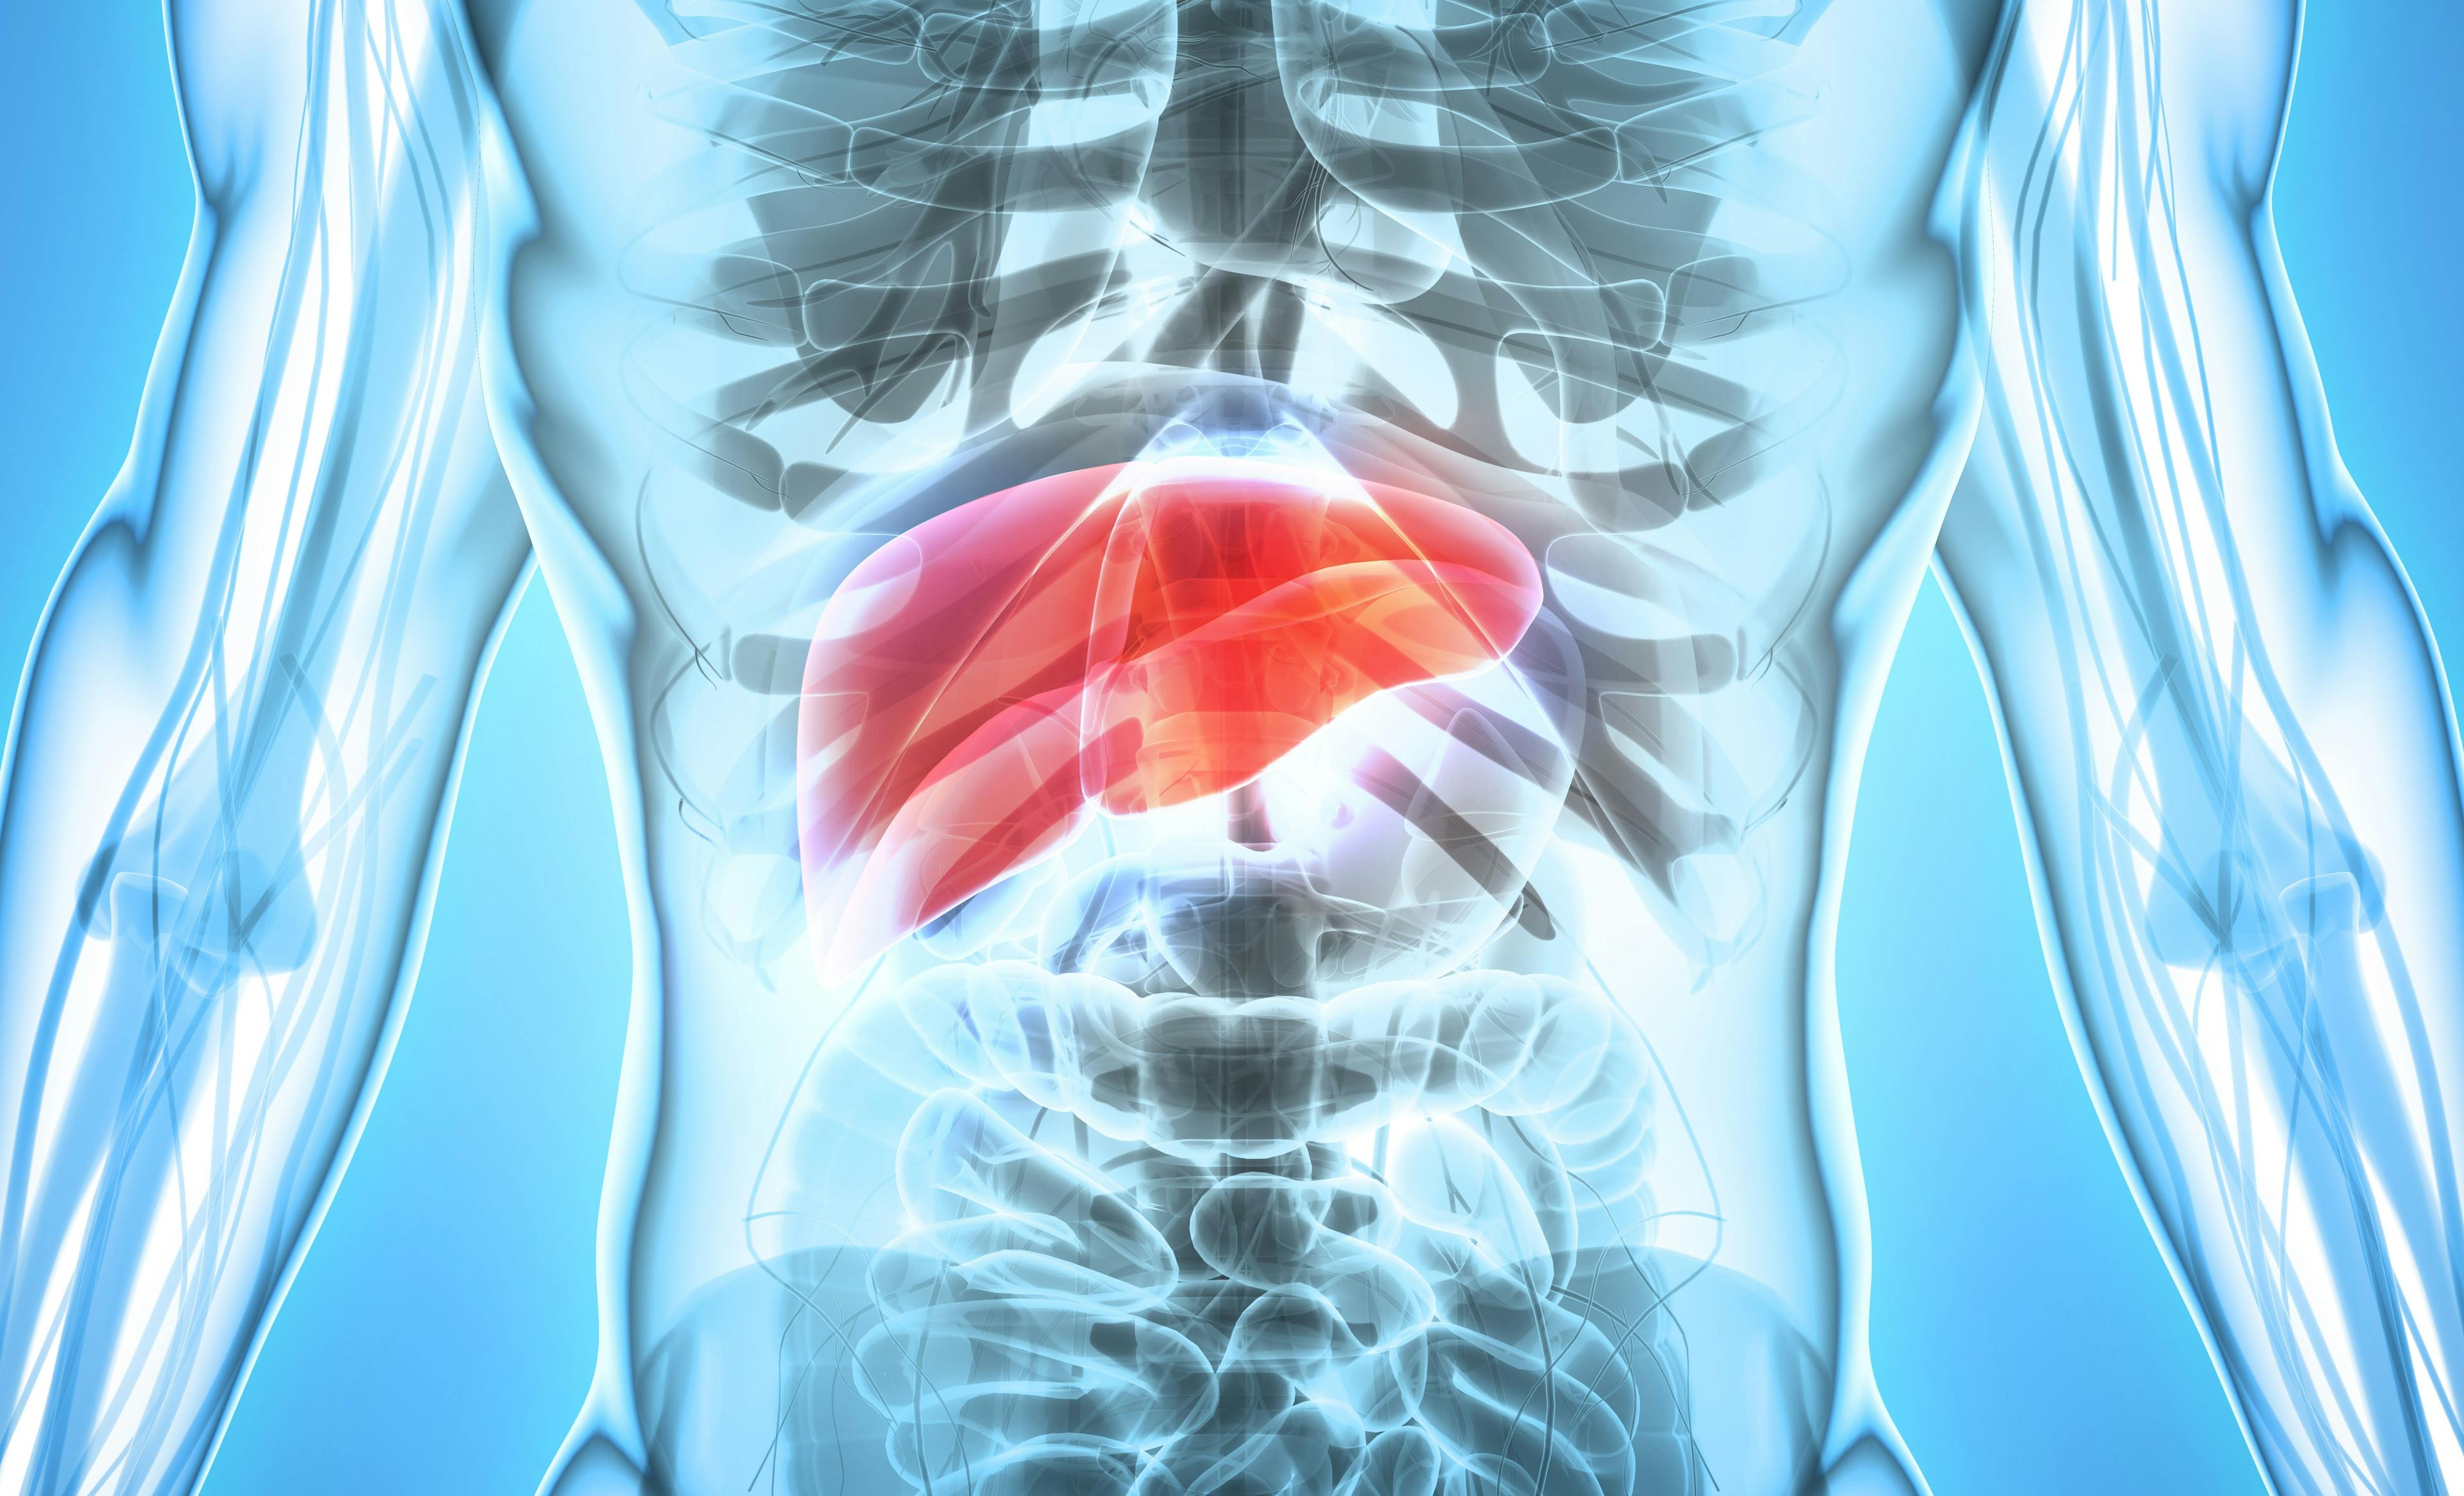 Top 5 Liver Cancer-Related Stories in 2021